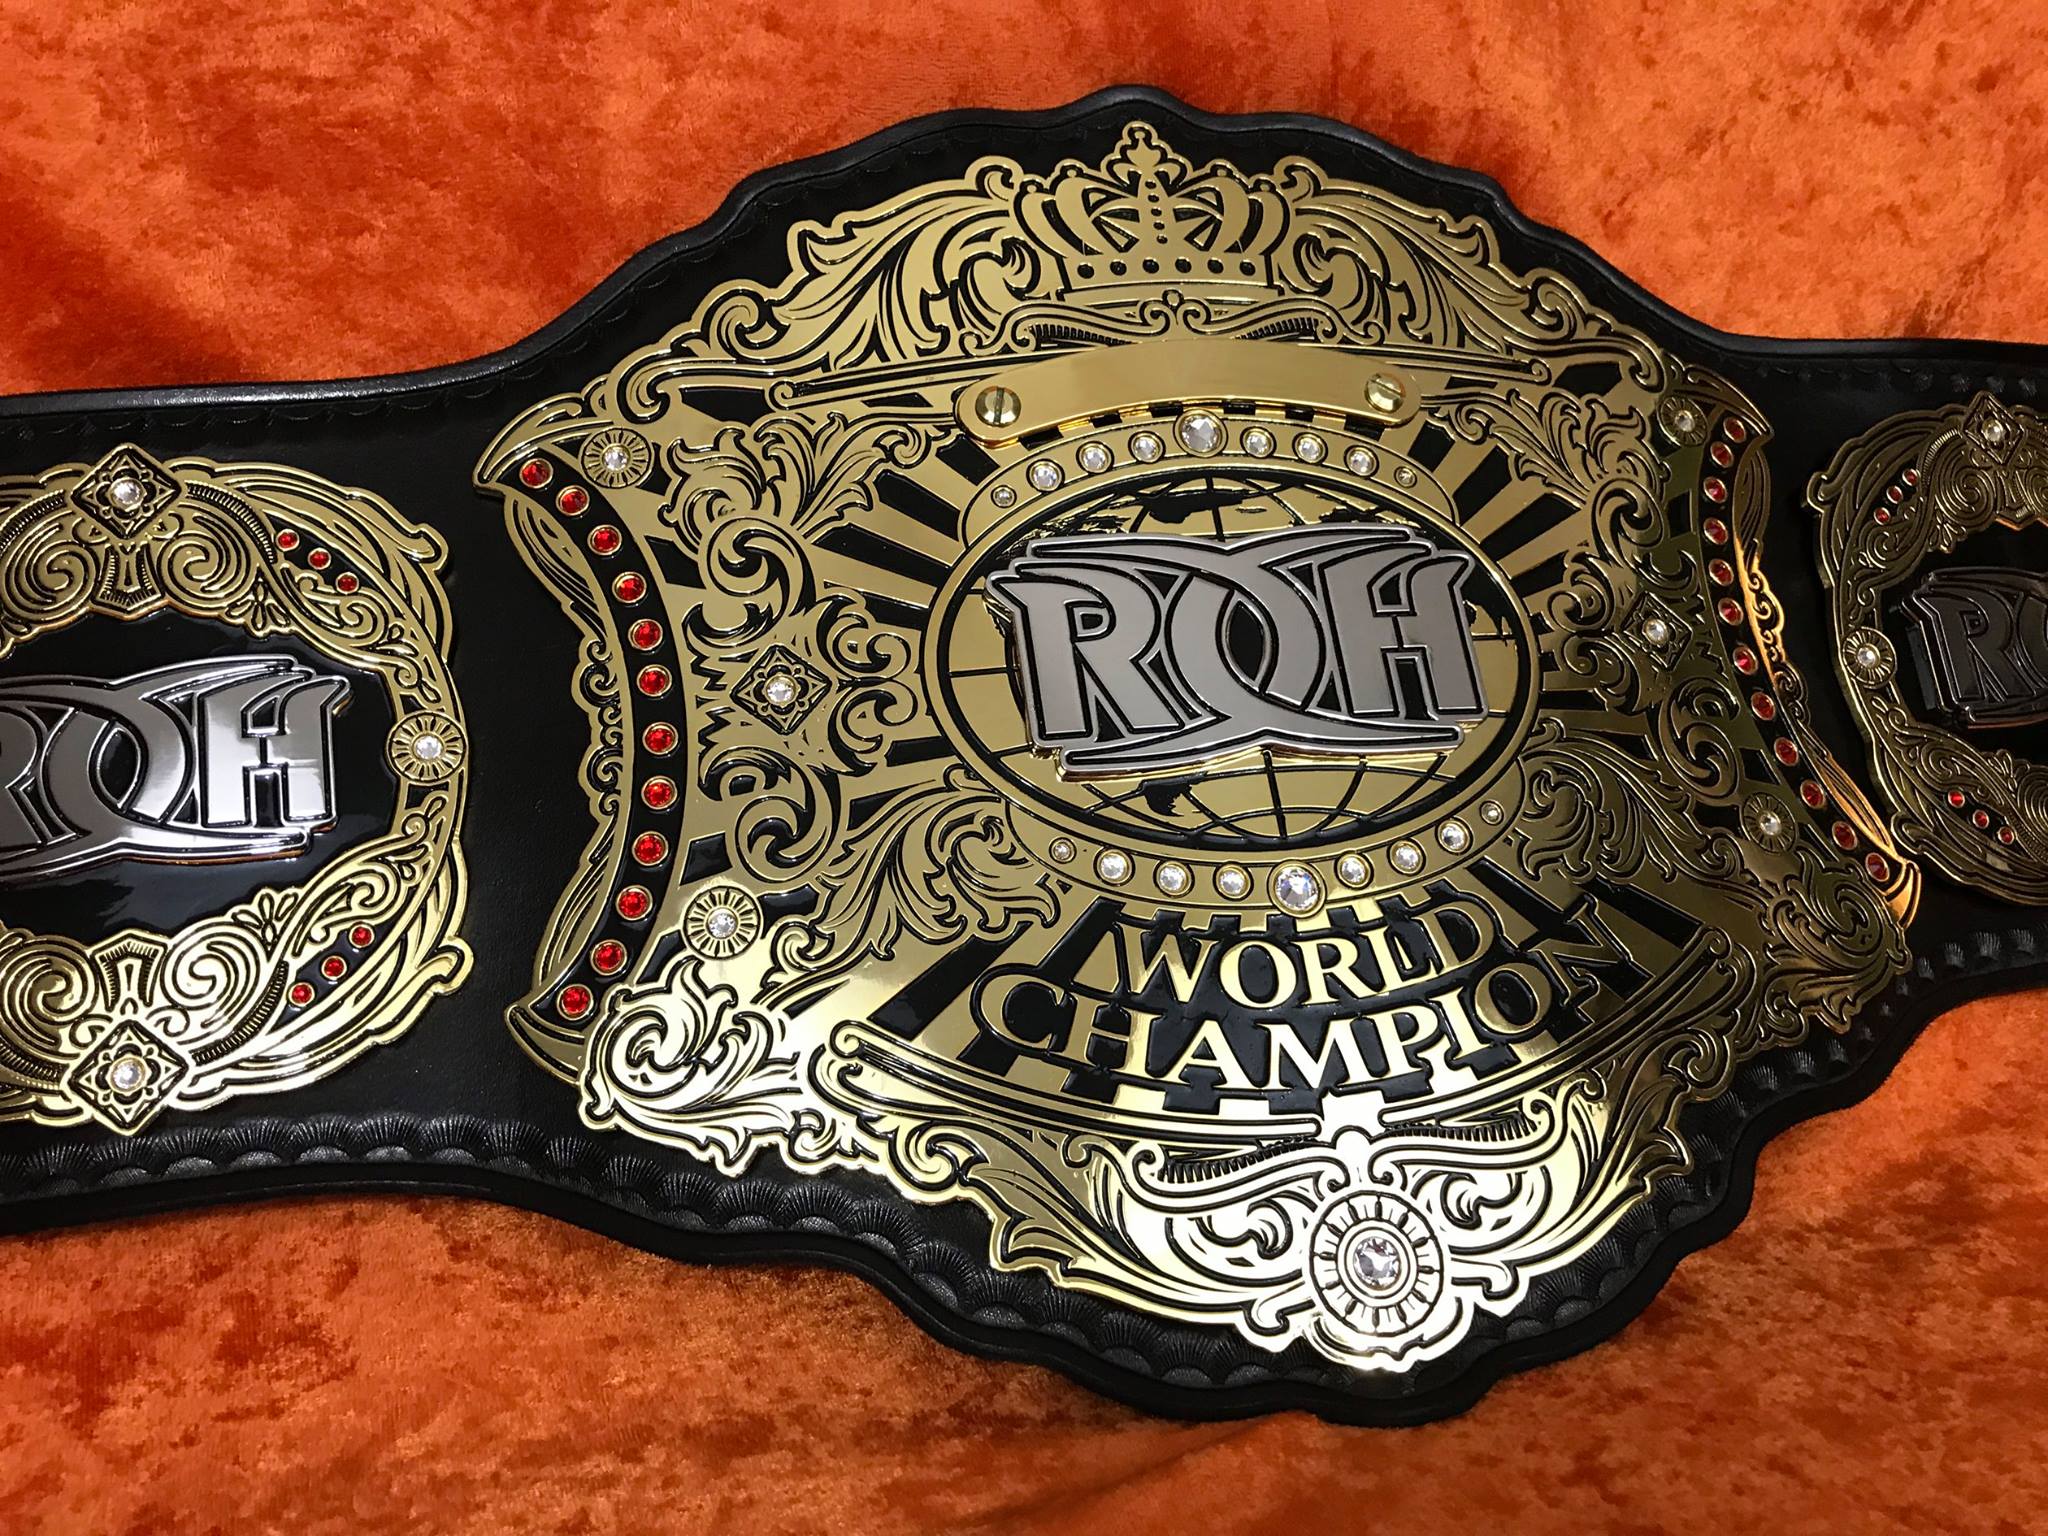 Pictures of the new ROH World Title